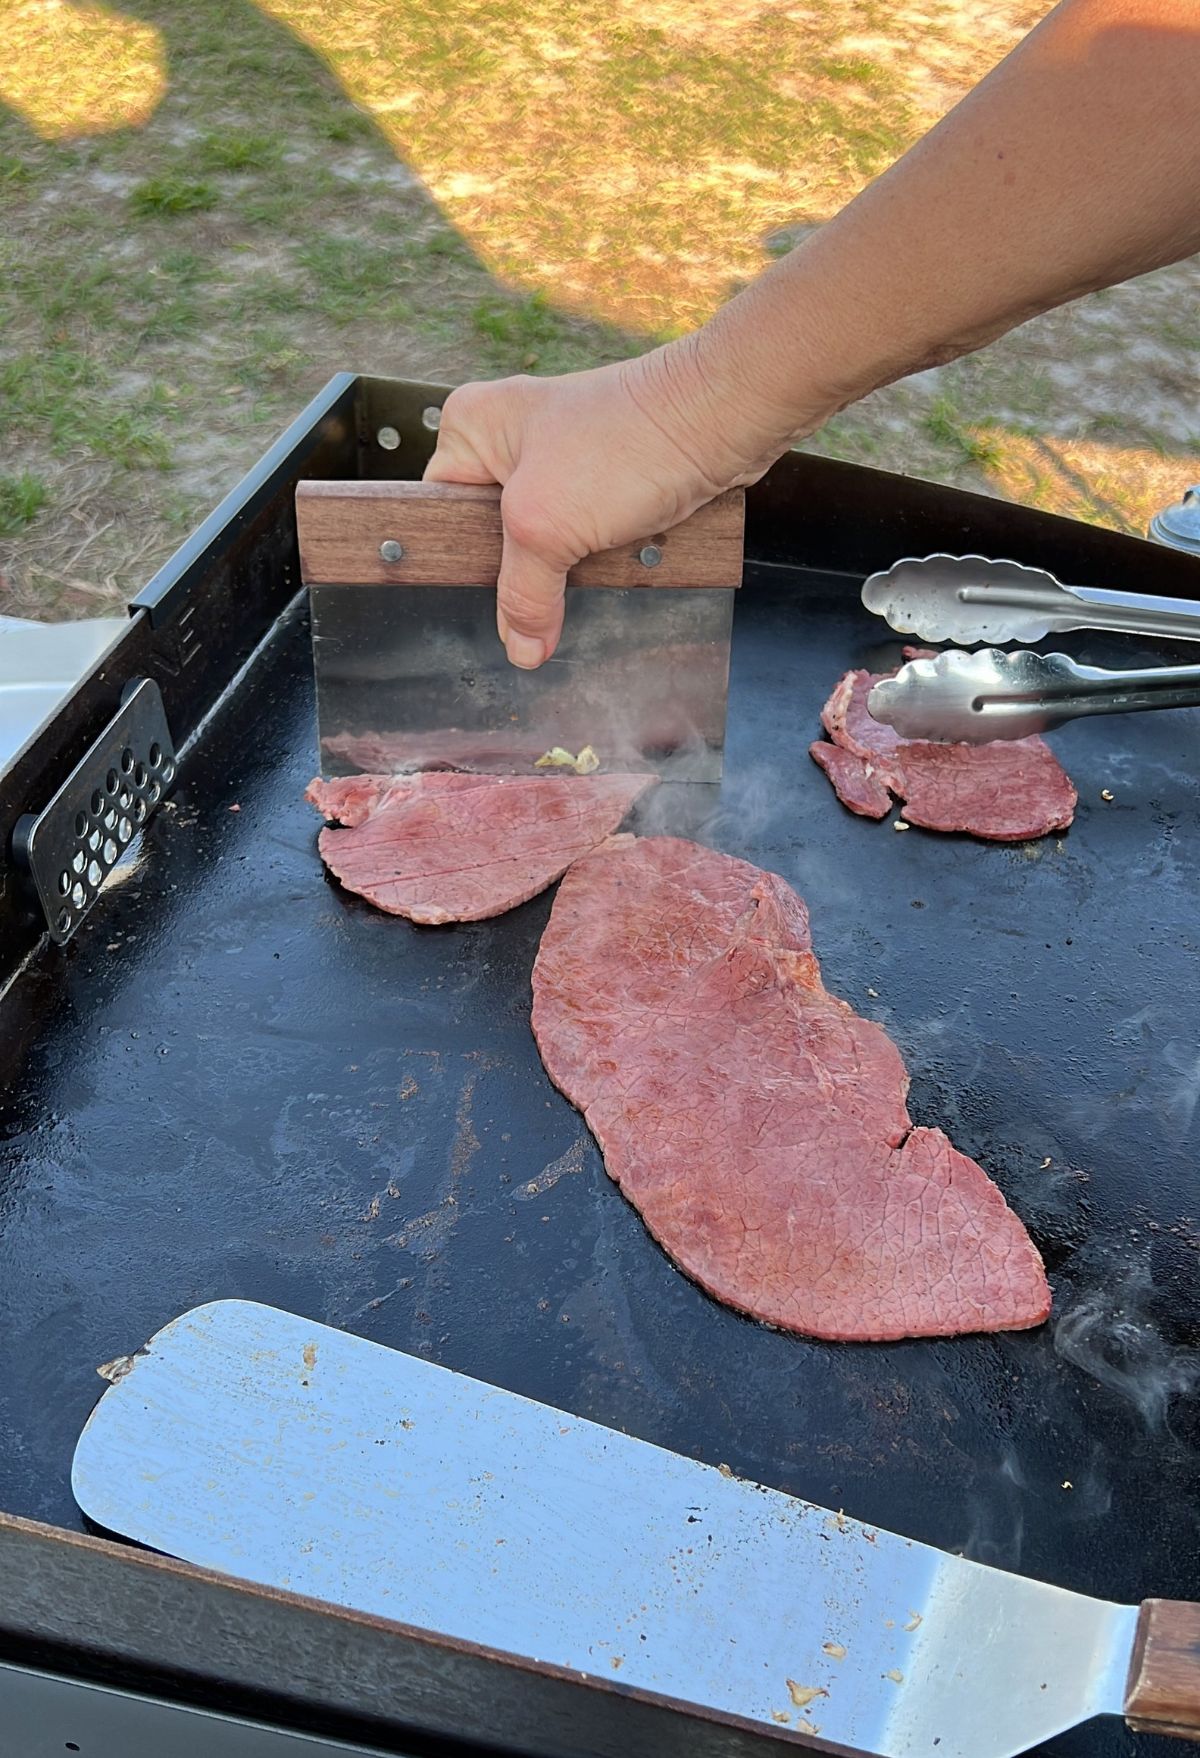 A person is slicing meat on a grill.